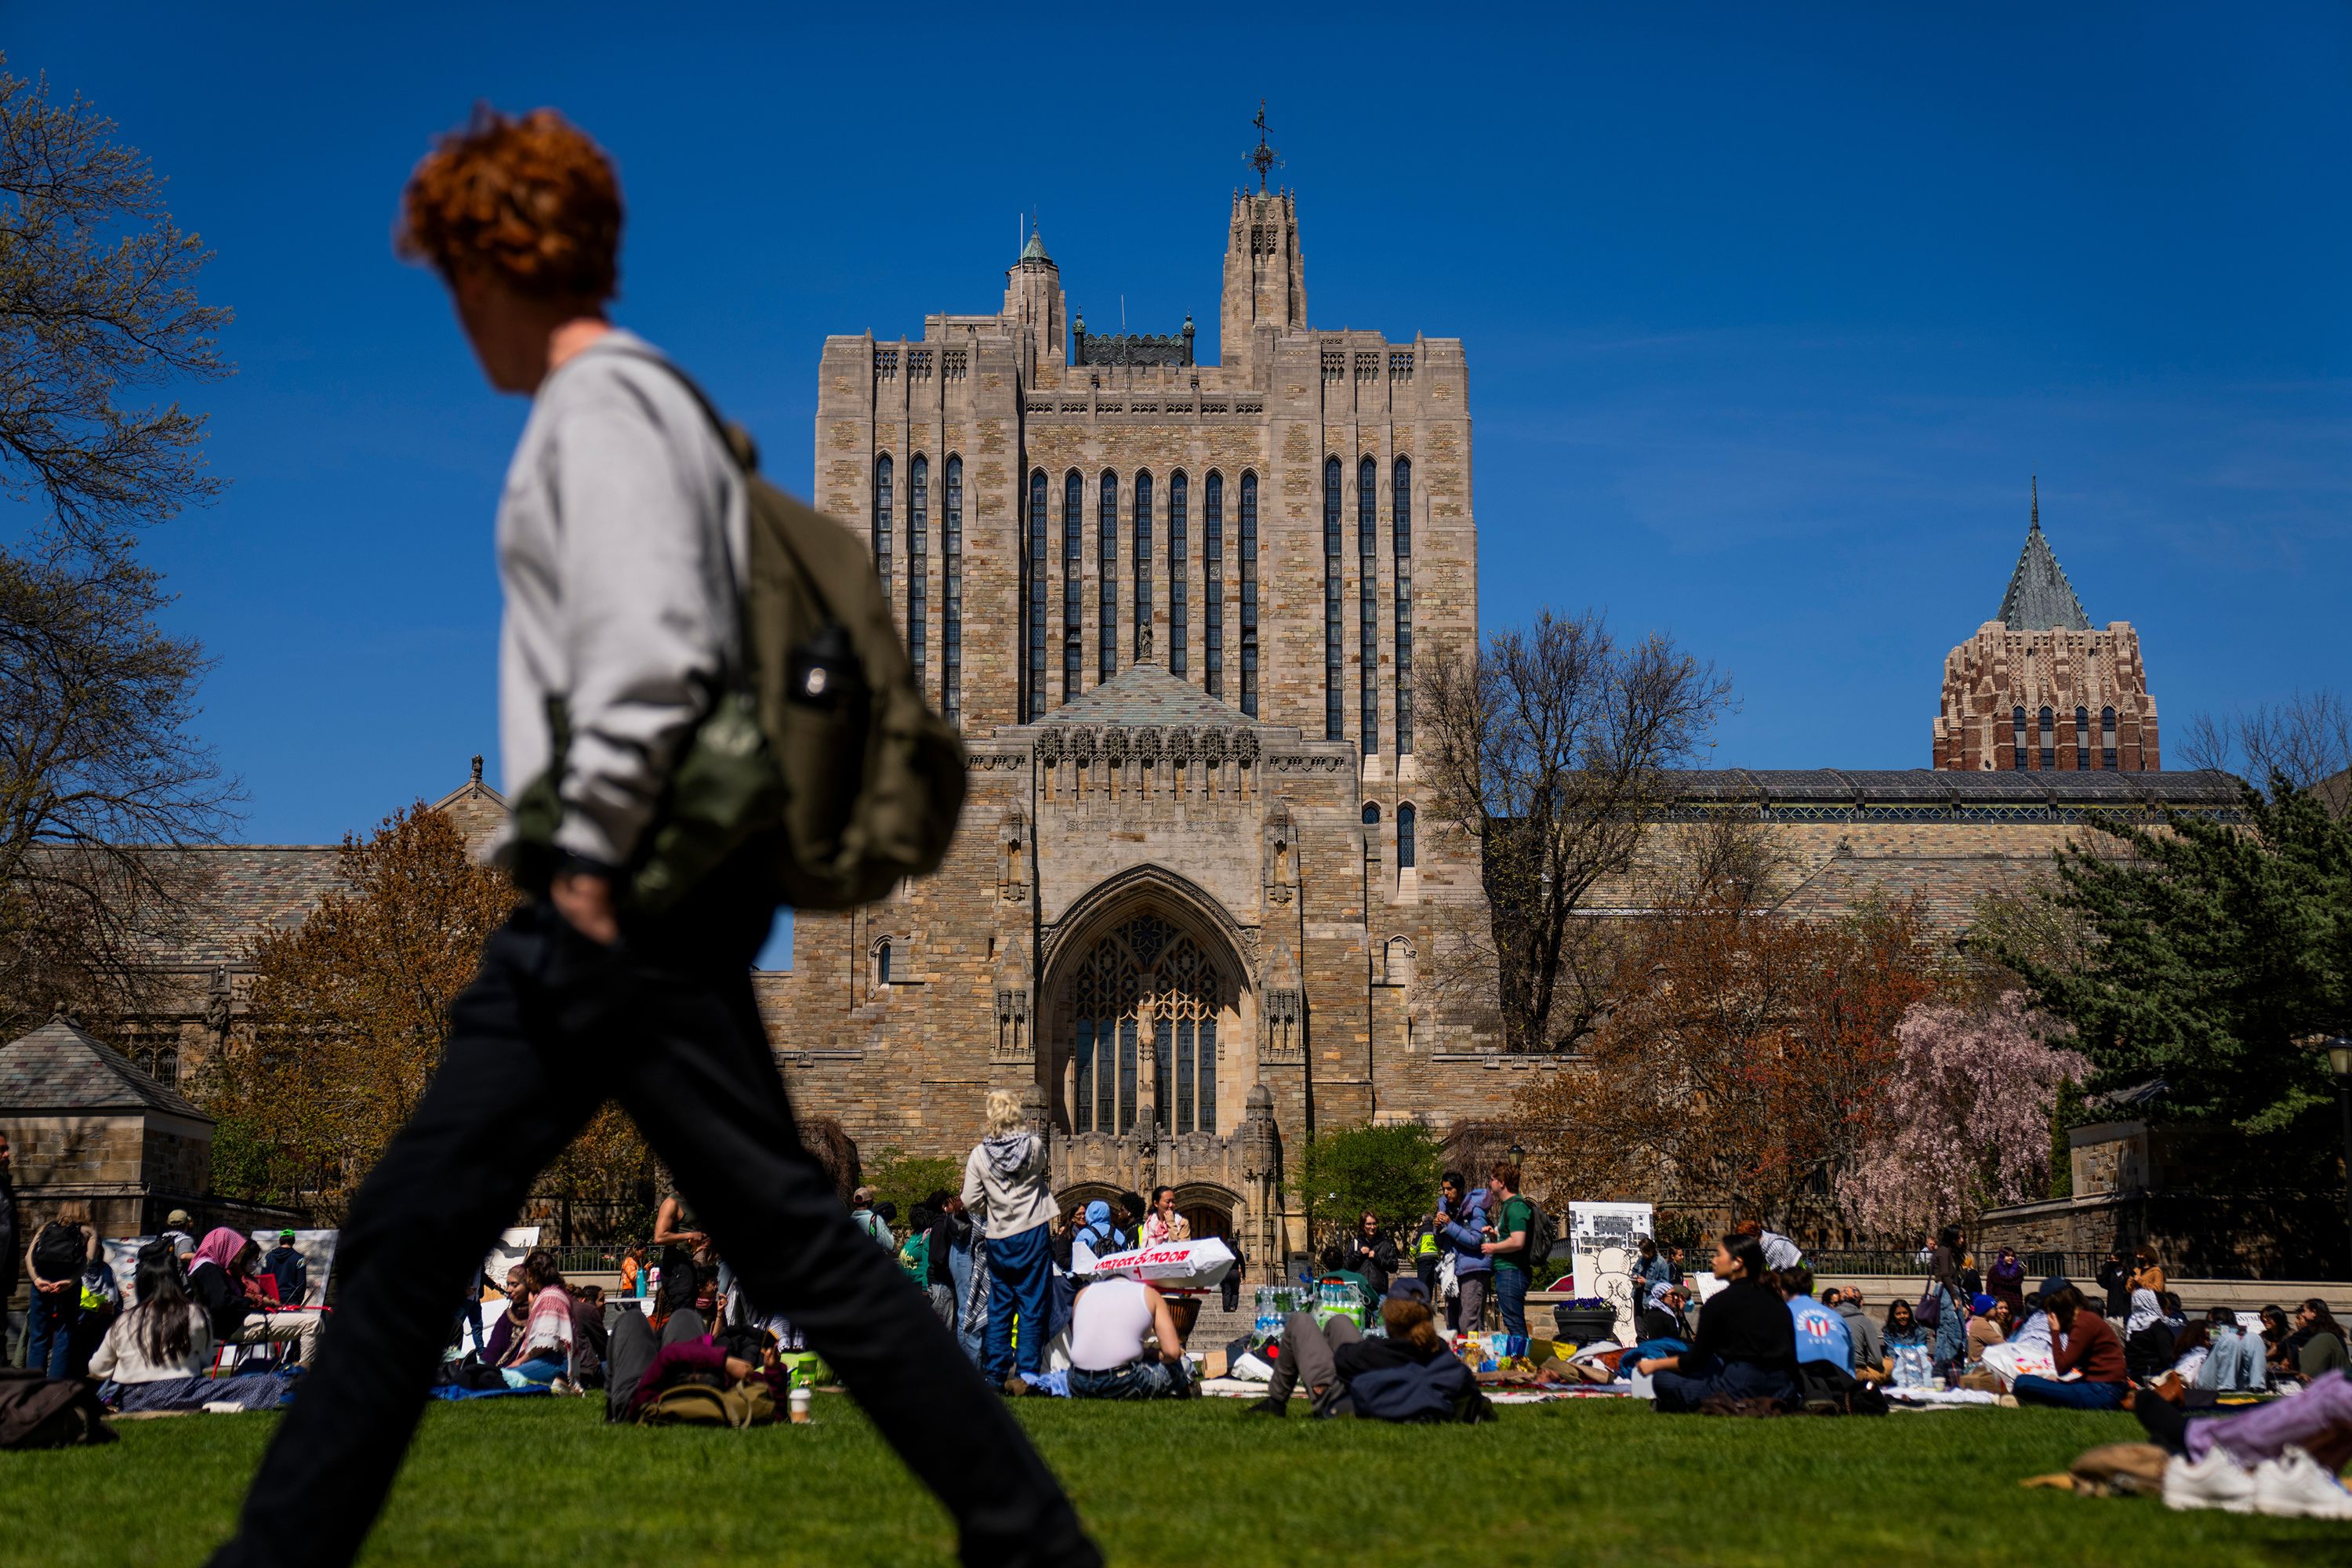 Pro-Palestinian demonstrators sit at Yale University in New Haven, Connecticut, on April 23. University police <a href="https://www.cnn.com/business/live-news/columbia-yale-student-protests-4-23-24/h_c3840d4903bac8dc32a790bcb17ee12b" target="_blank">arrested at least 45 protesters the day before</a> and charged them with criminal trespassing after they refused orders to leave.